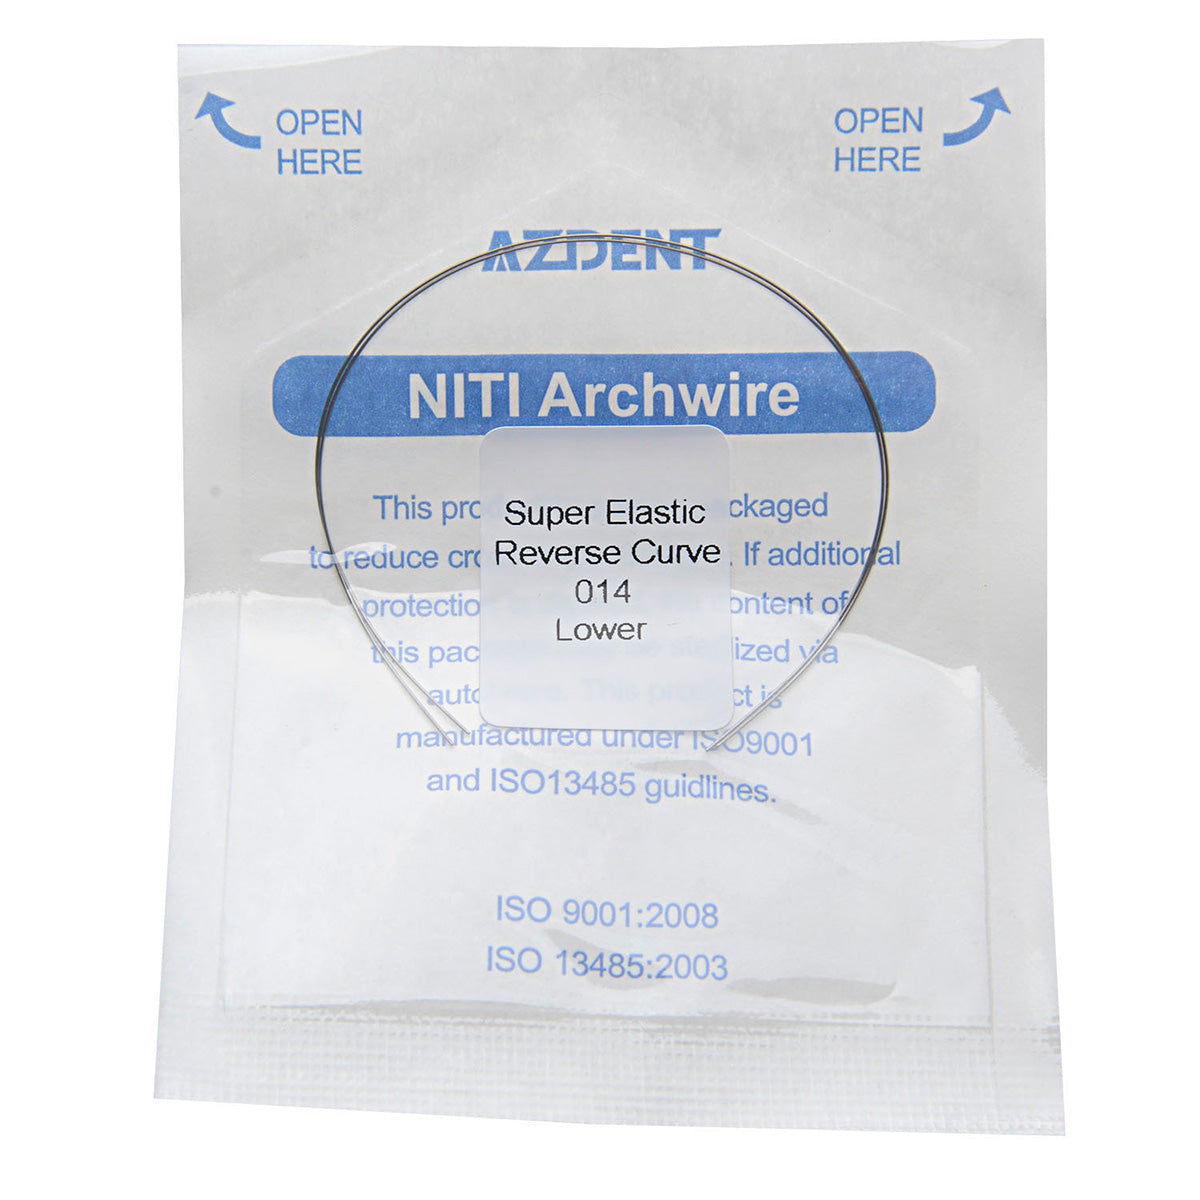 AZDENT Archwire NiTi Reverse Curve Round 0.014 Lower 2pcs/Pack